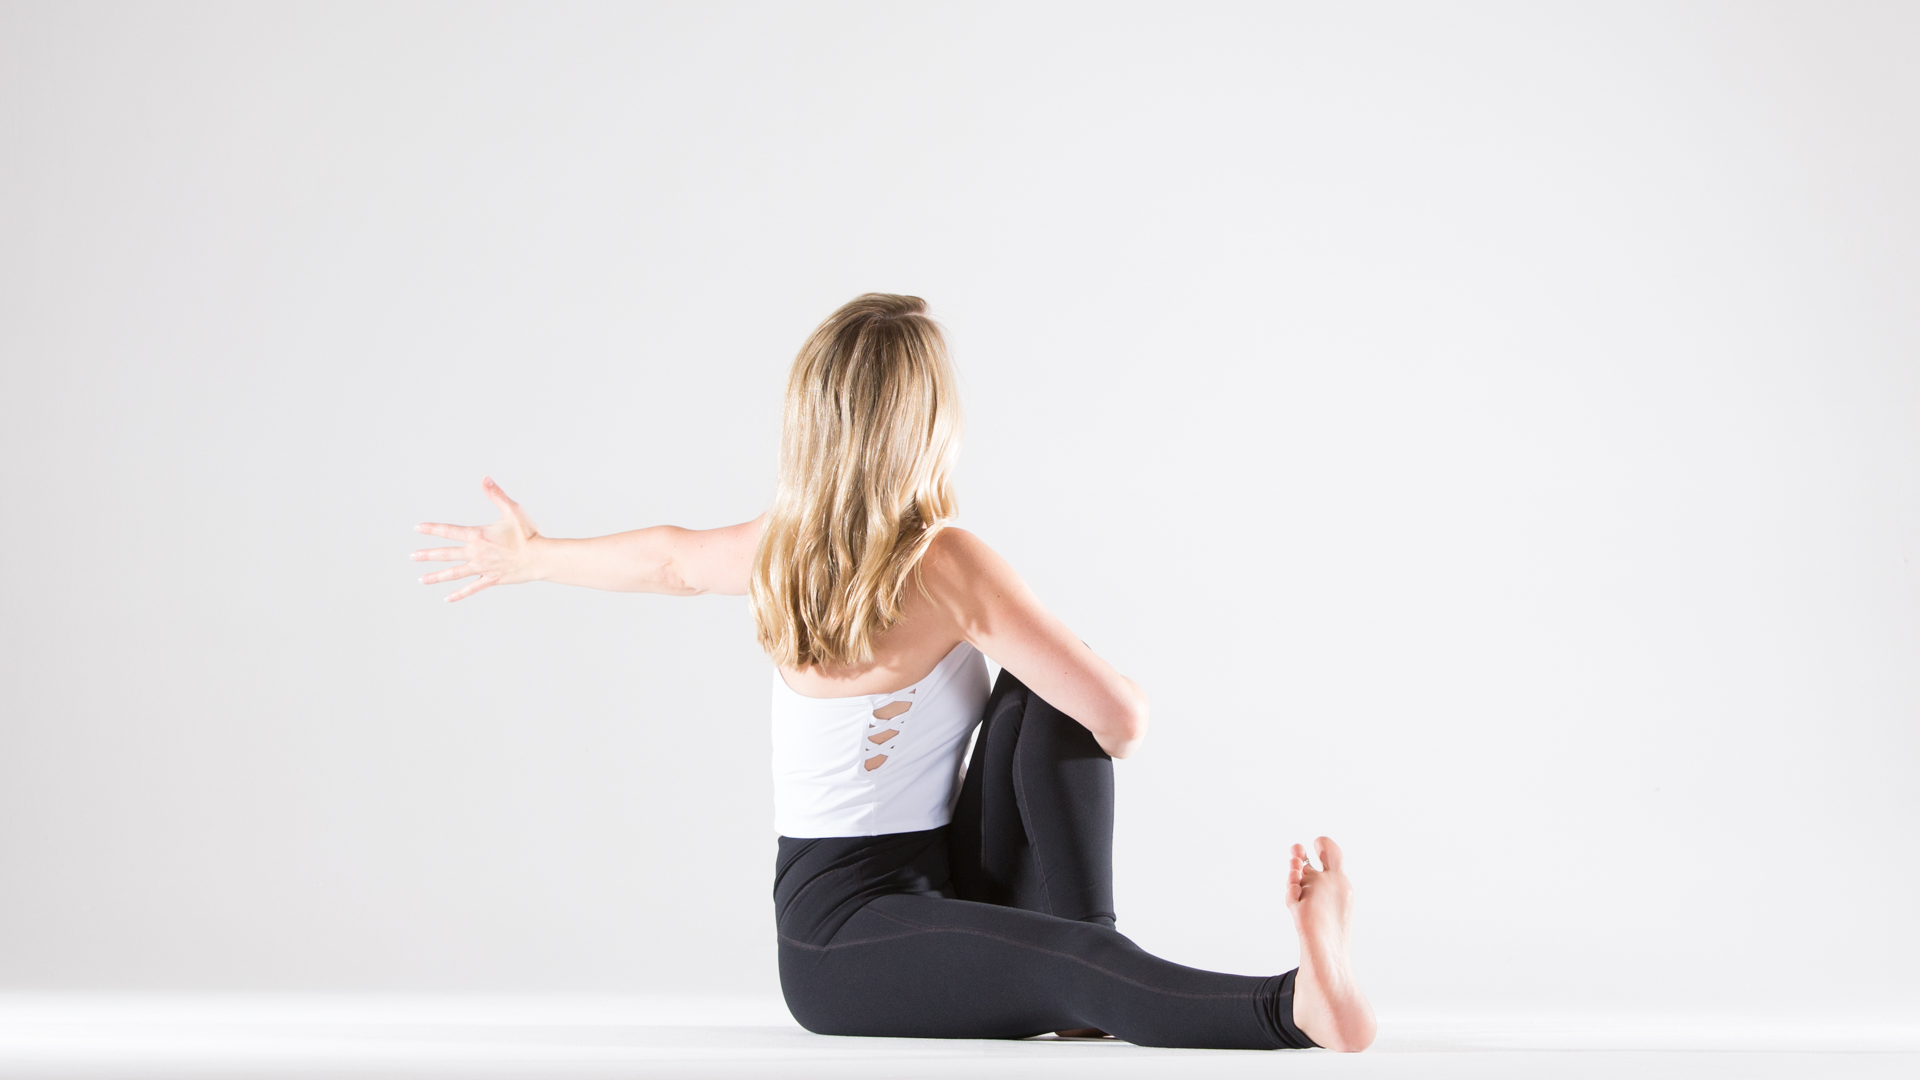 Start Your Practice With This Hip-Focused Sequence